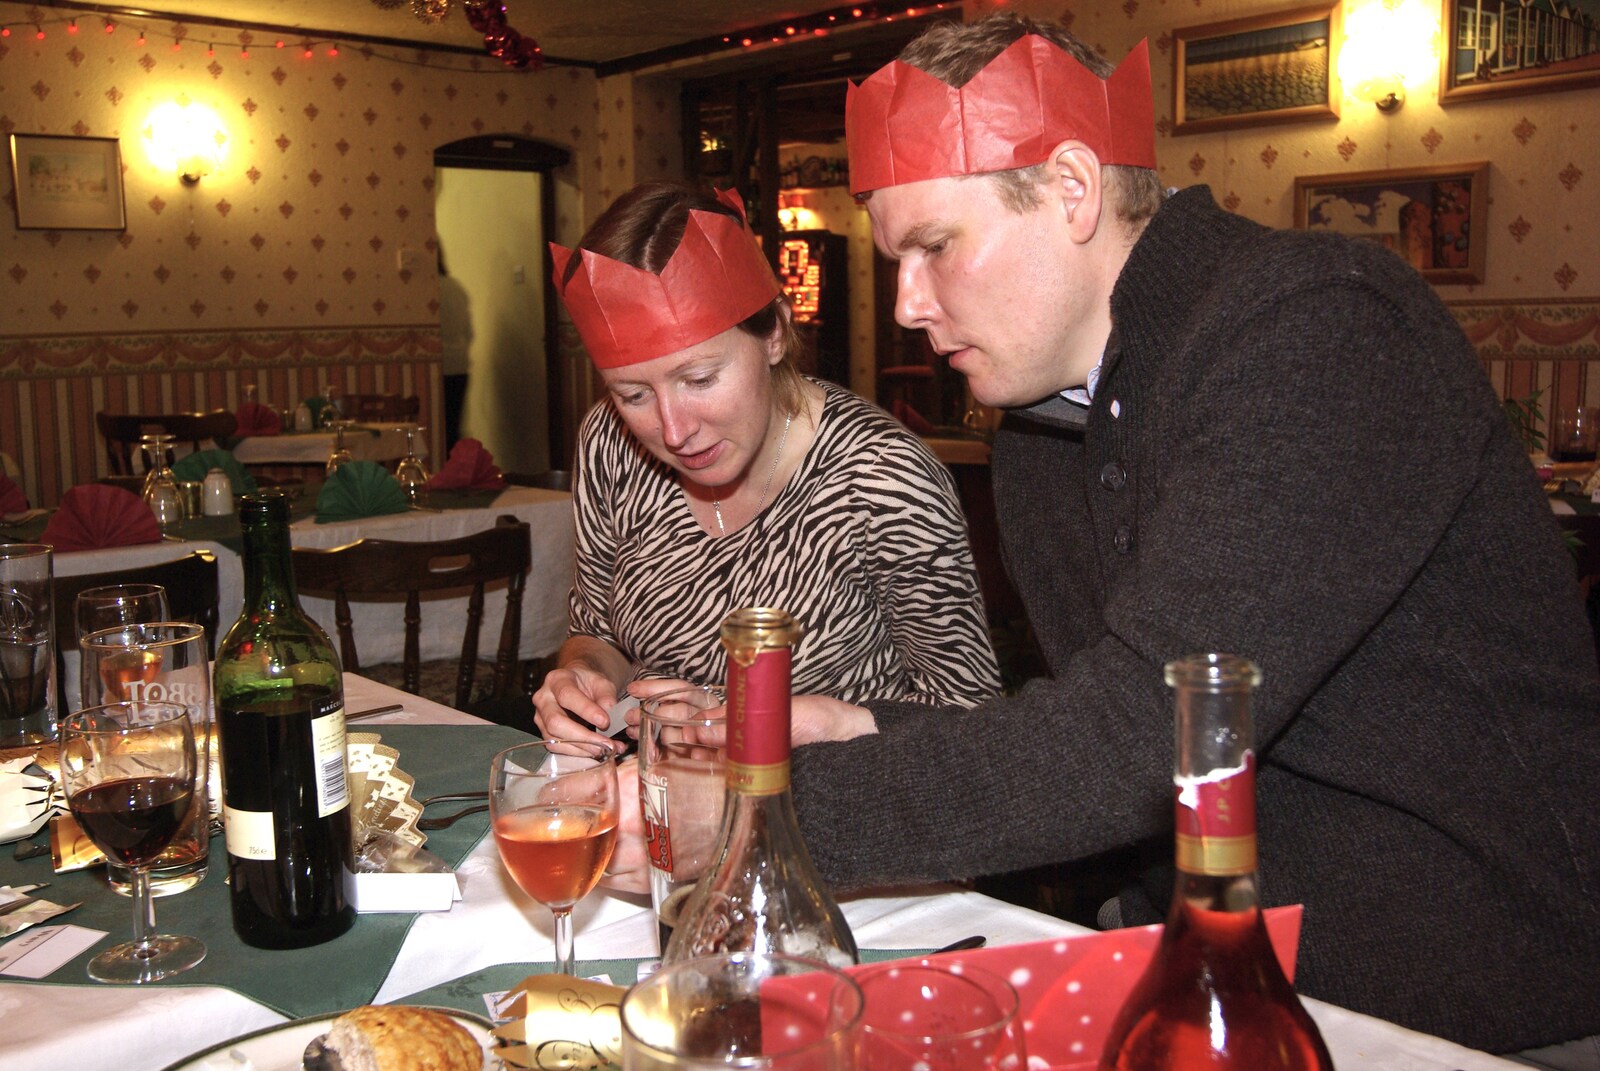 Martina and Bill from The BSCC Christmas Dinner, The Swan Inn, Brome, Suffolk - 5th December 2009